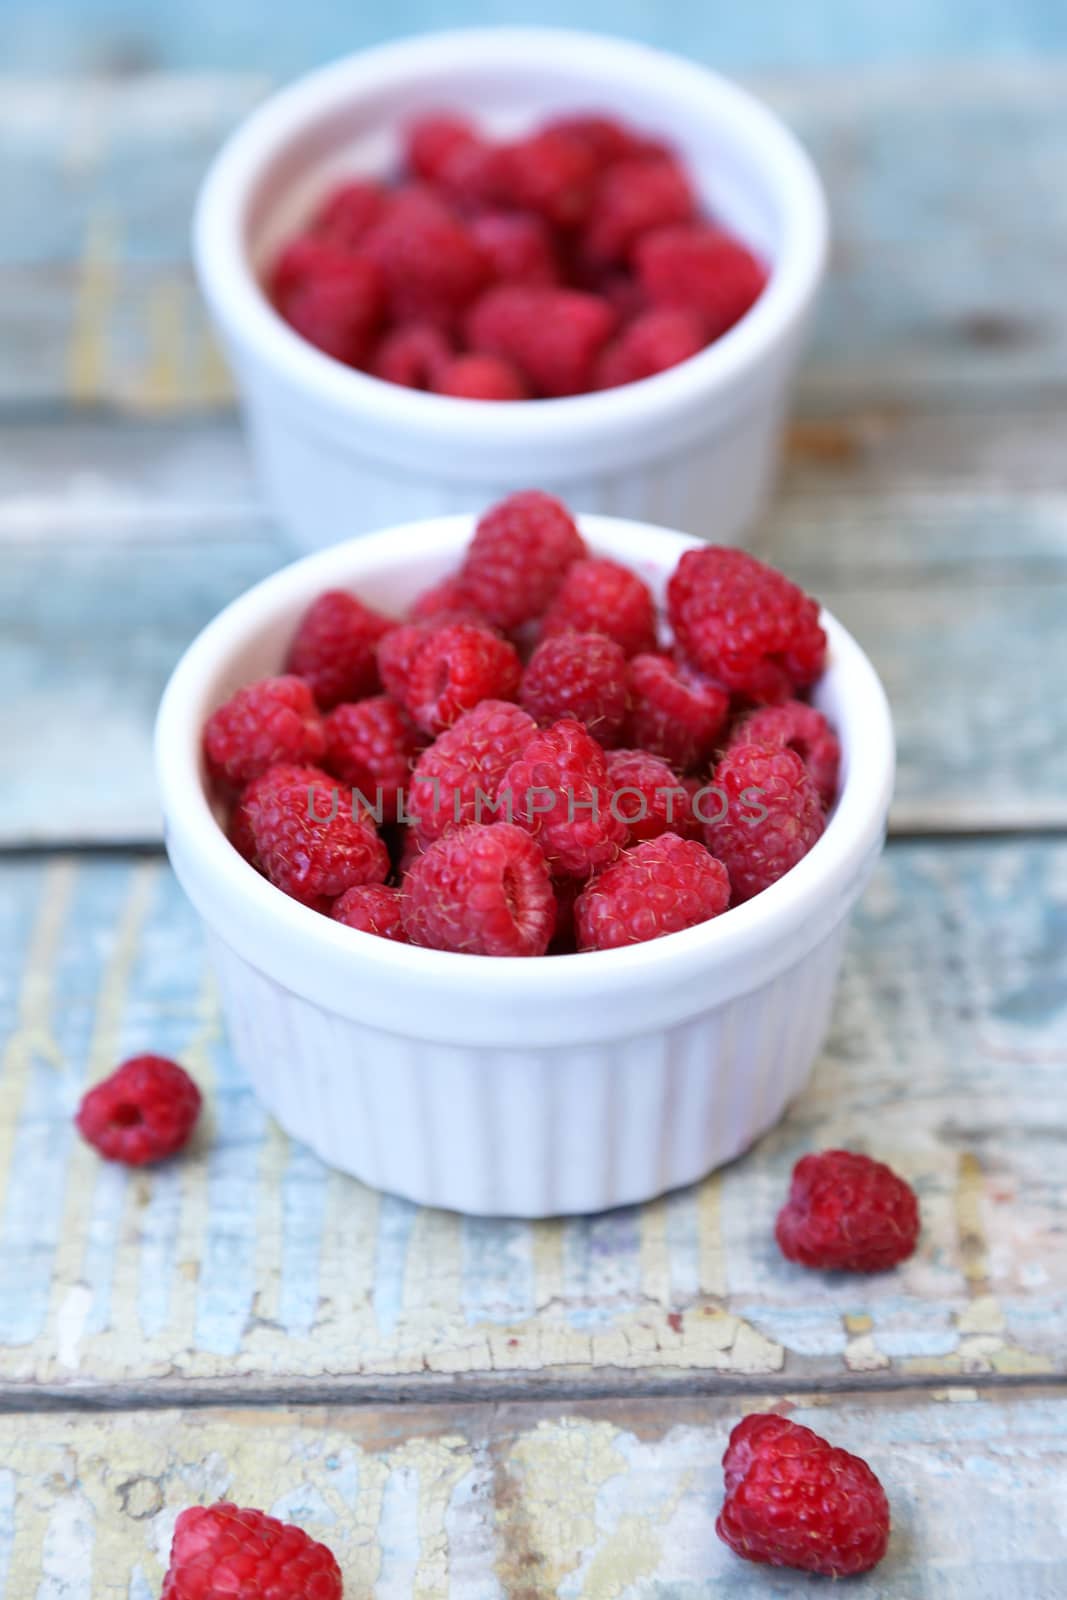 much fresh ripe raspberry in a white bowl on a wooden background